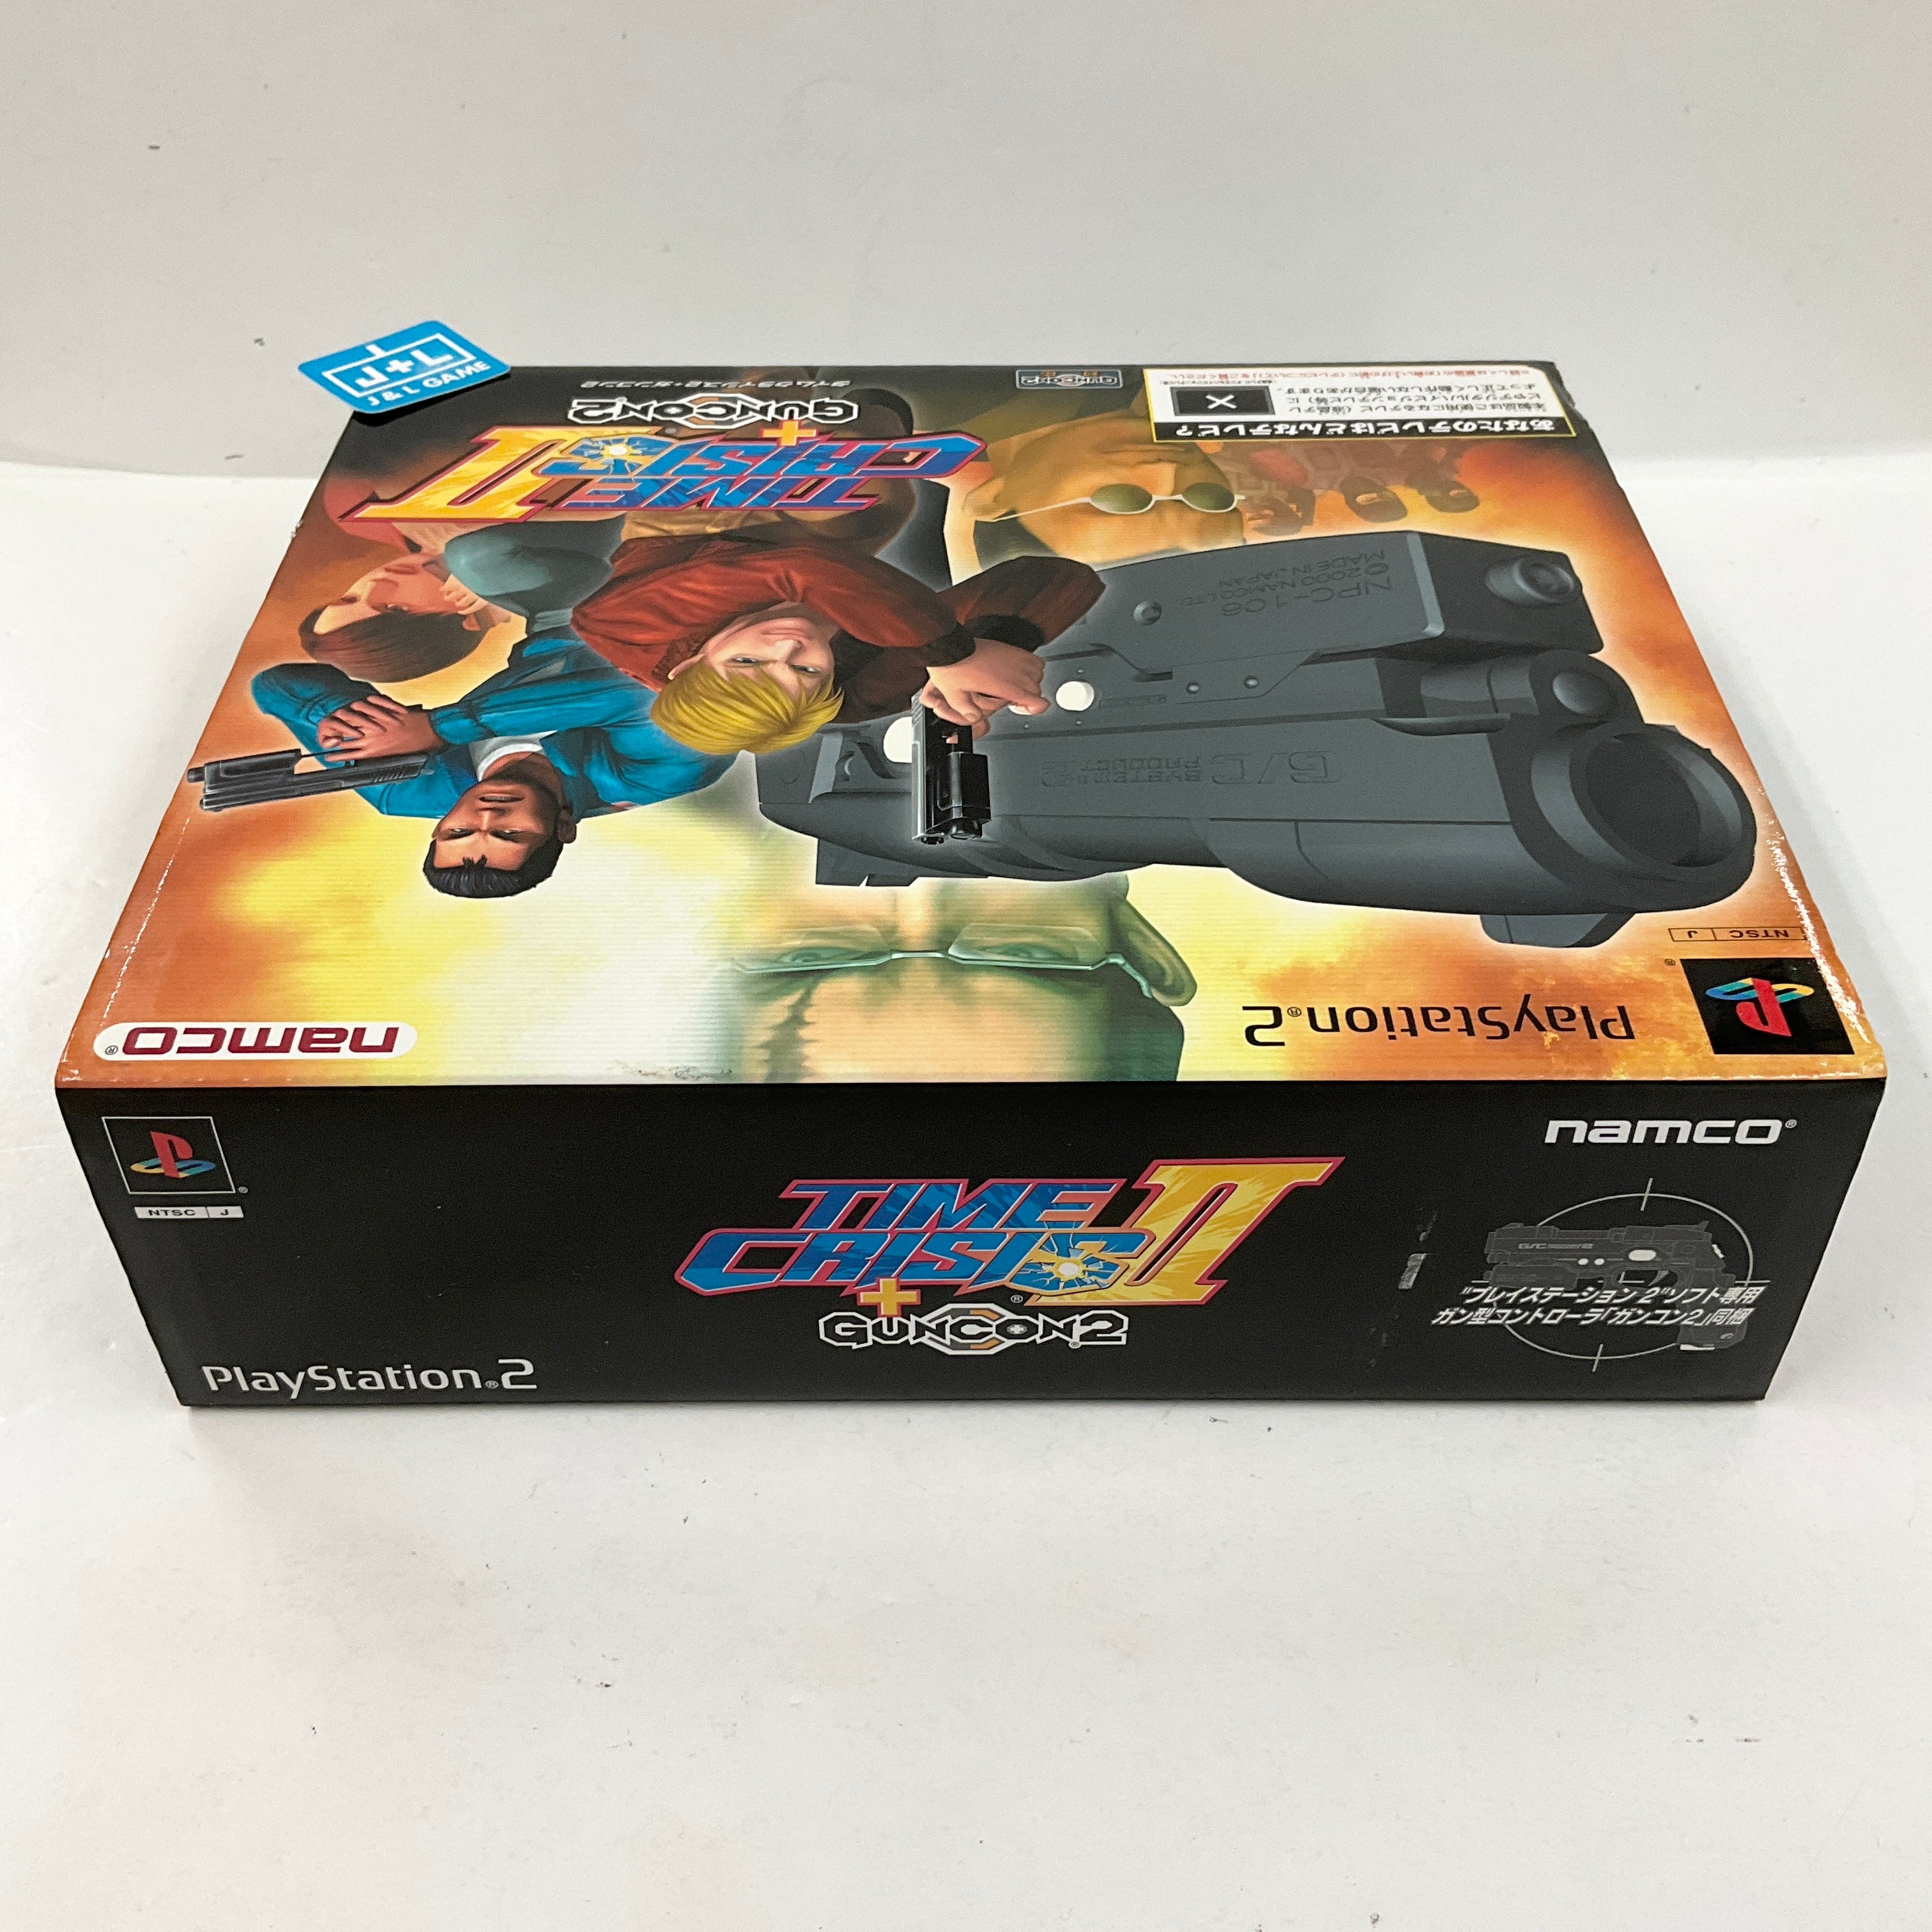 Time Crisis II + Guncon 2 - (PS2) Playstation 2 [Pre-Owned] [Japanese Import] Video Games Namco   